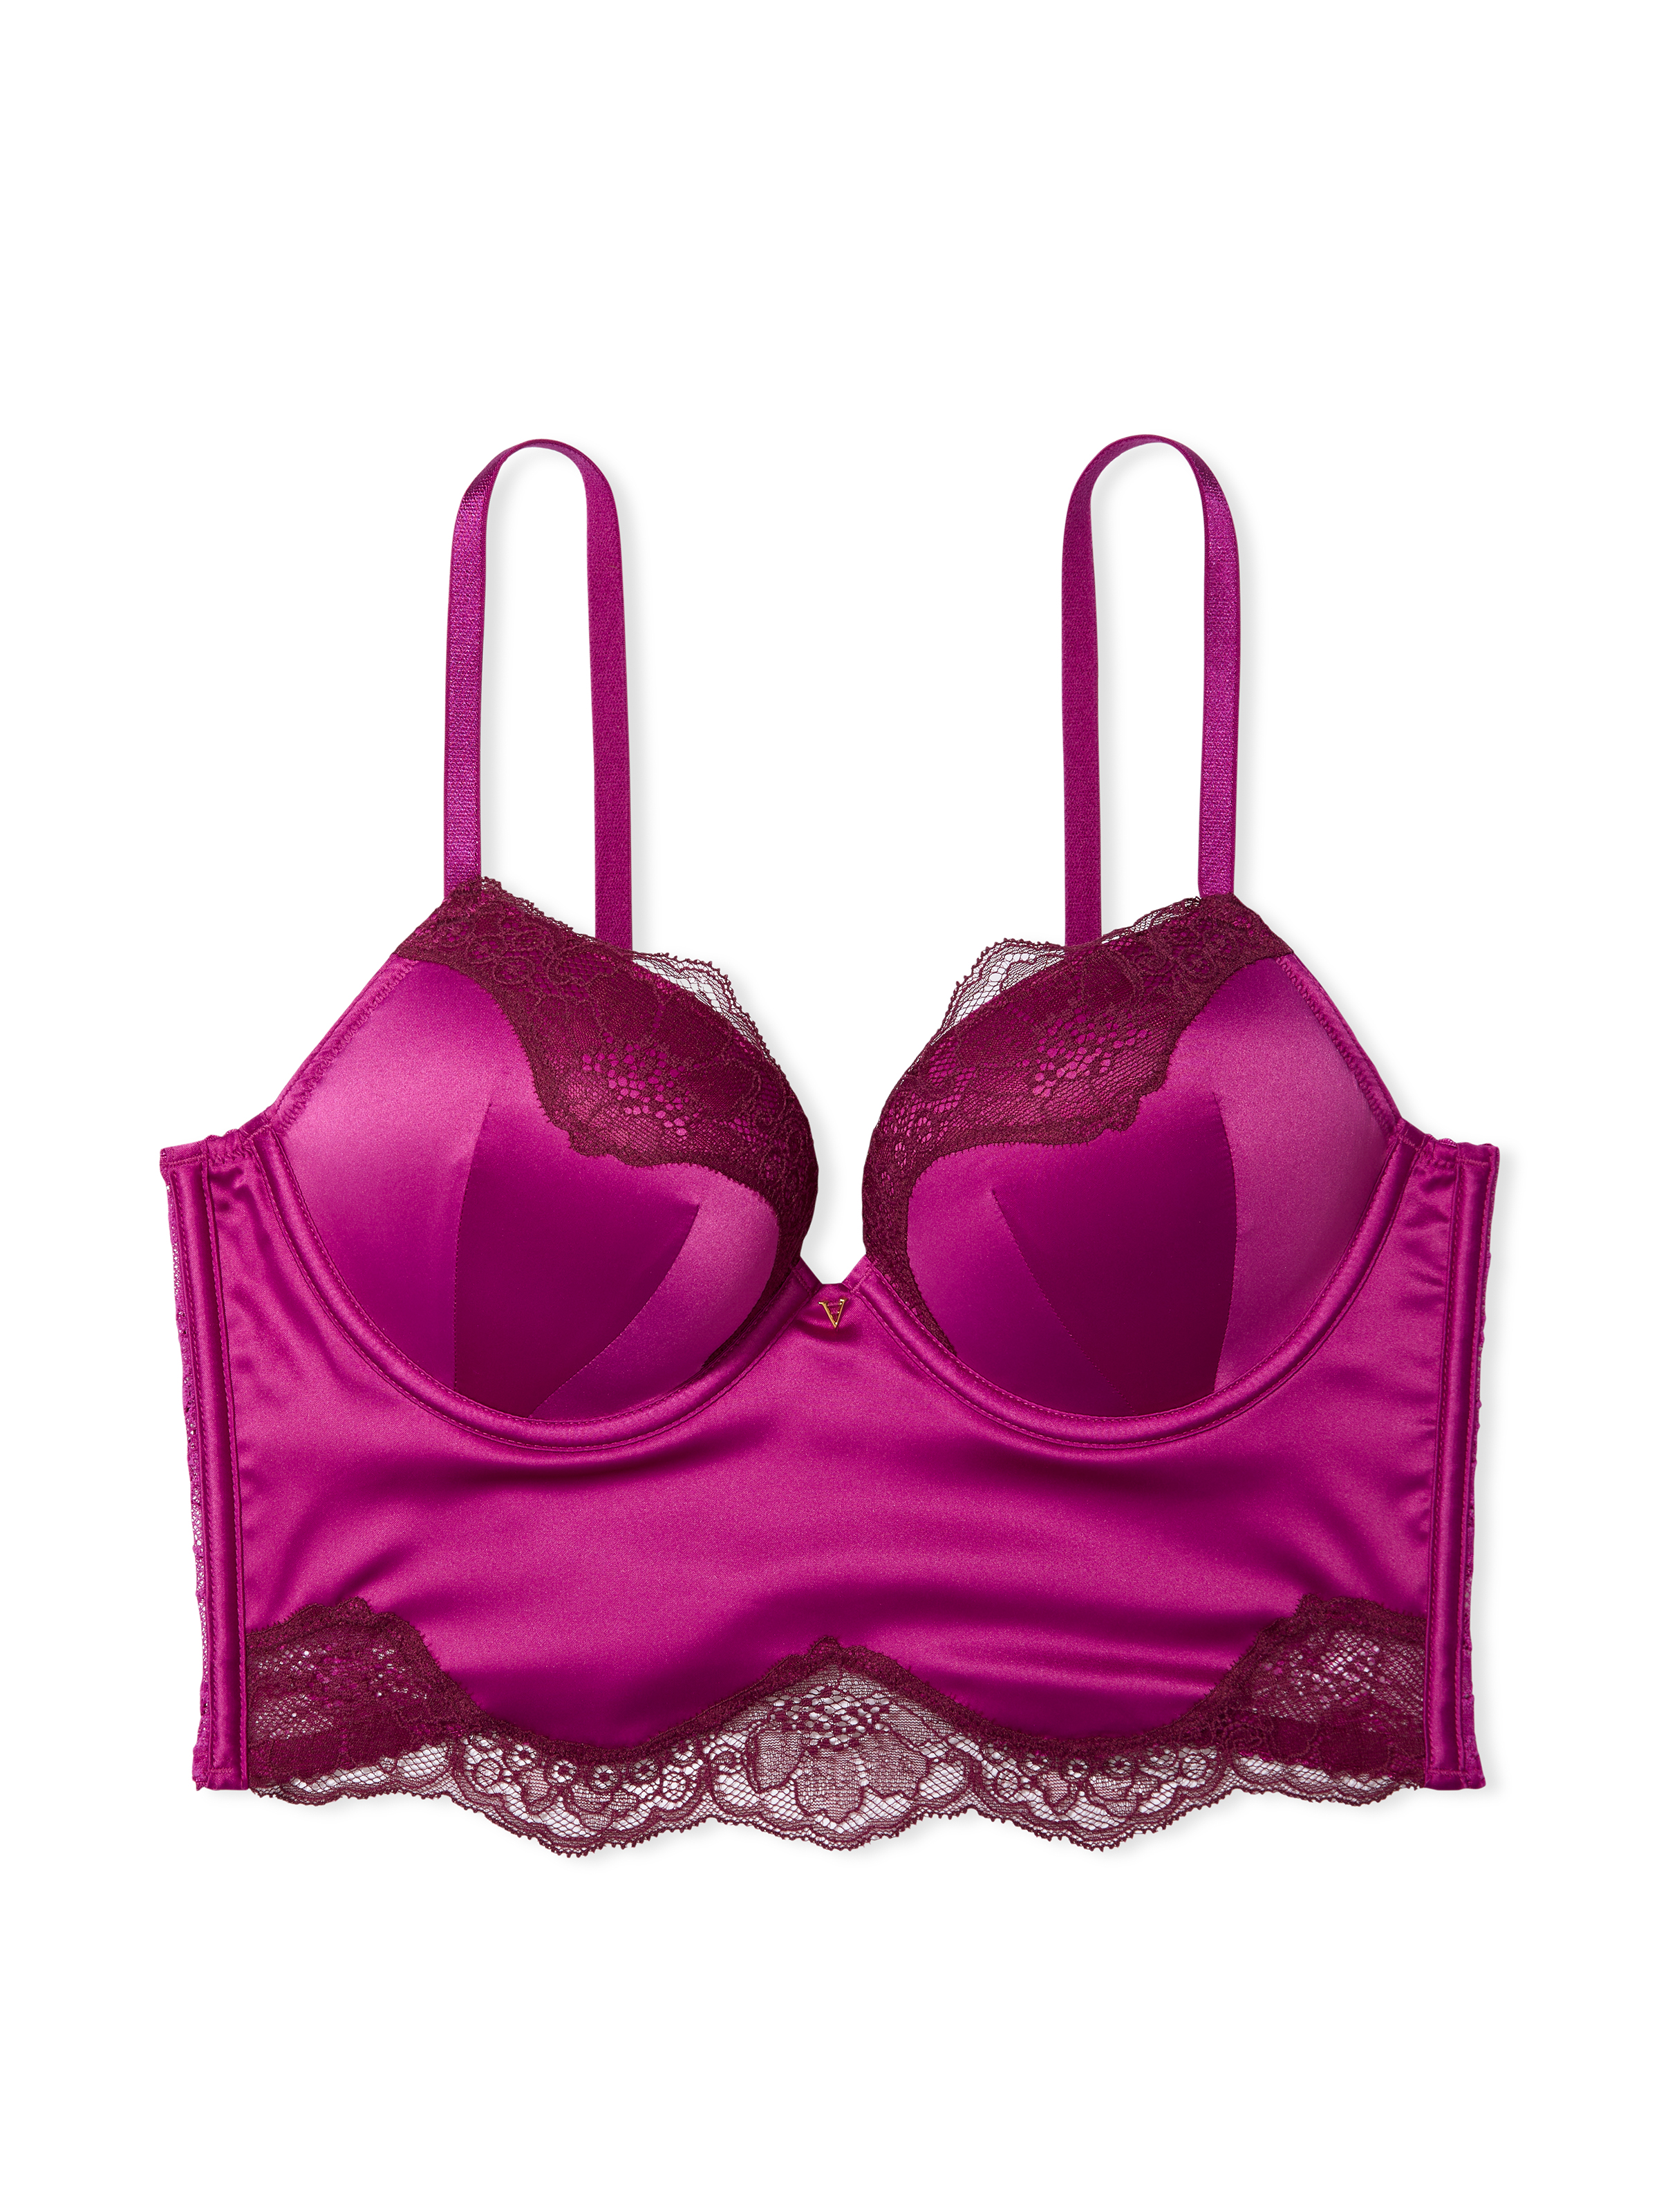  Victorias Secret Bombshell Shine Strap Push Up Bra, Add 2  Cups, Plunge Neckline, Lace, Bras For Women, Very Sexy Collection, Pink